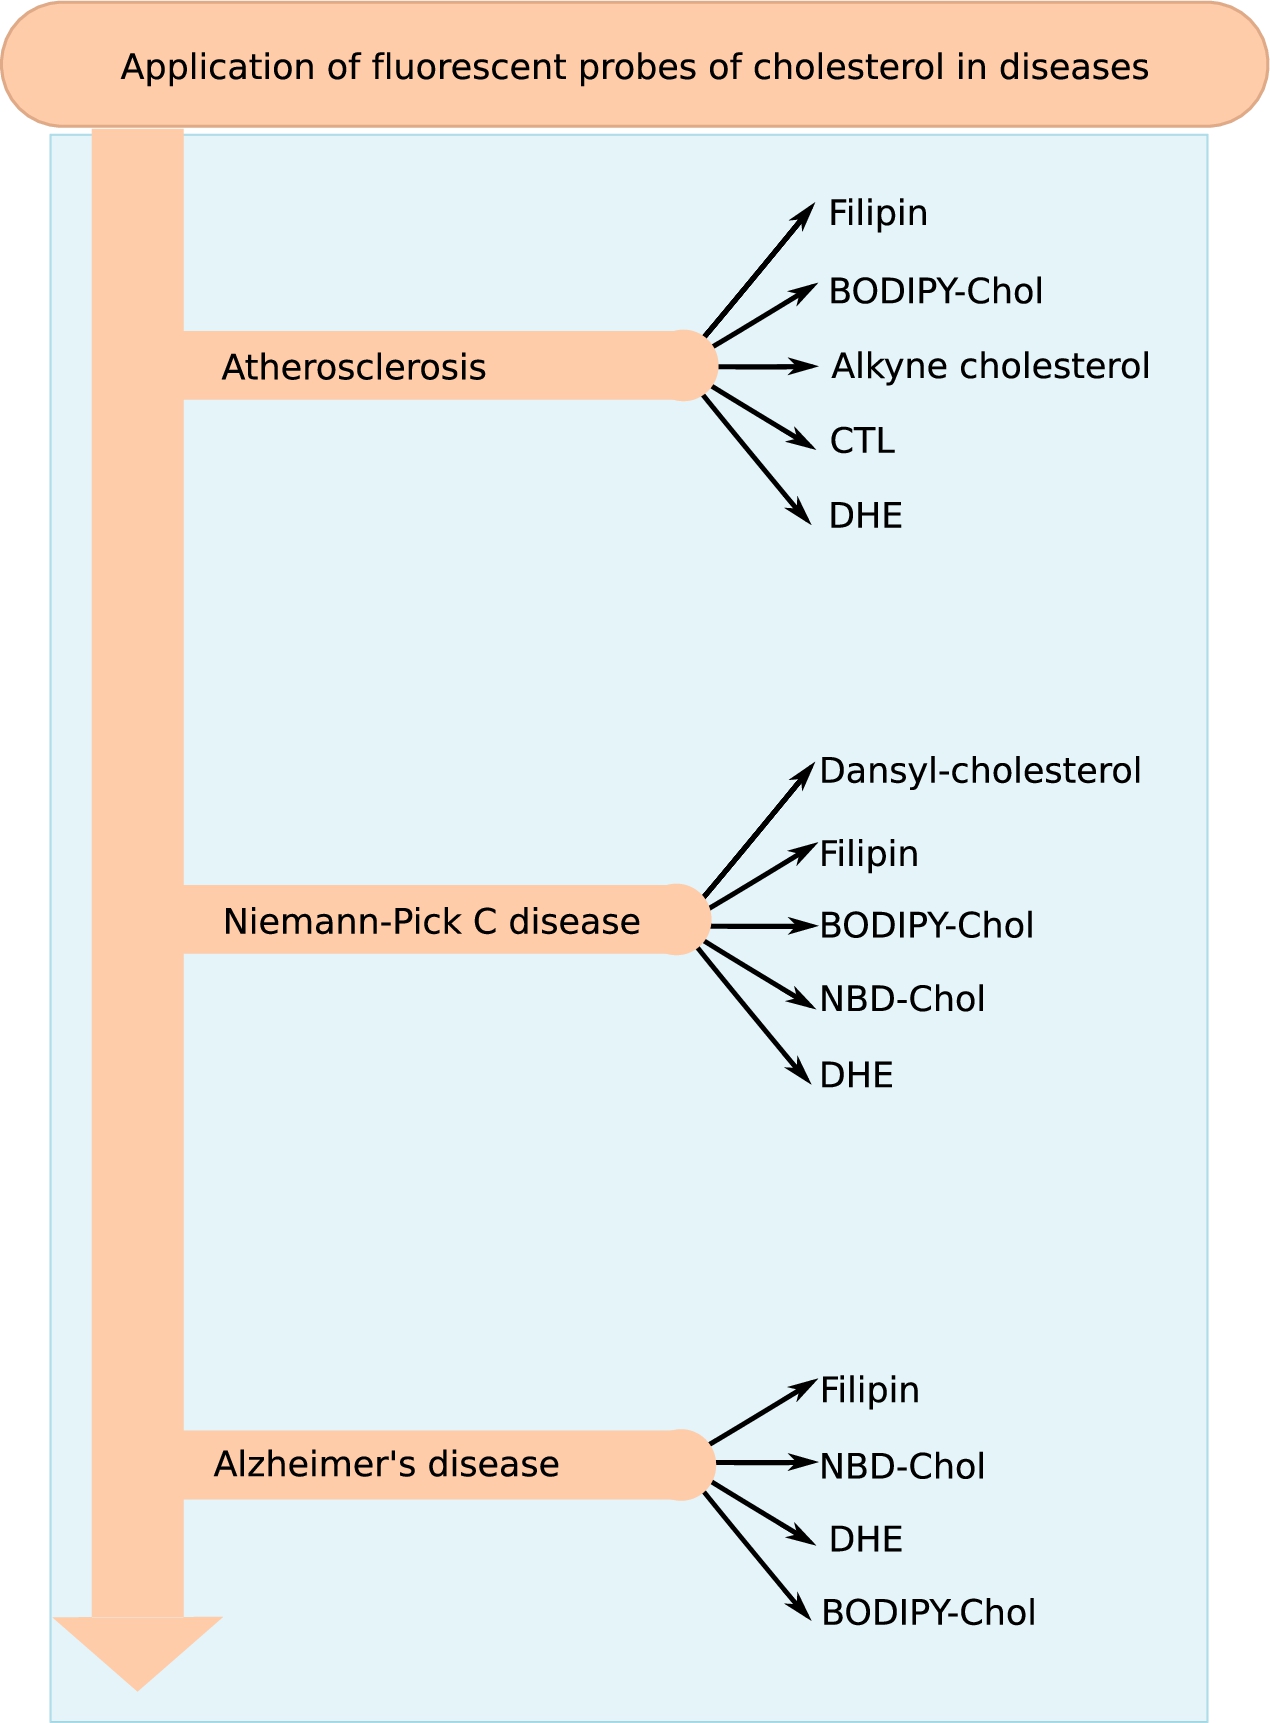 Application of fluorescent probes of cholesterol in disease research. Cholesterol is a major lipid in eukaryotic membranes and has been associated with a plethora of diseases. The figure gives a summary of the fluorescent probes that have been used for research and diagnosis of the three representative diseases (atherosclerosis, Alzheimer’s and Niemann–Pick C disease) discussed in the review.